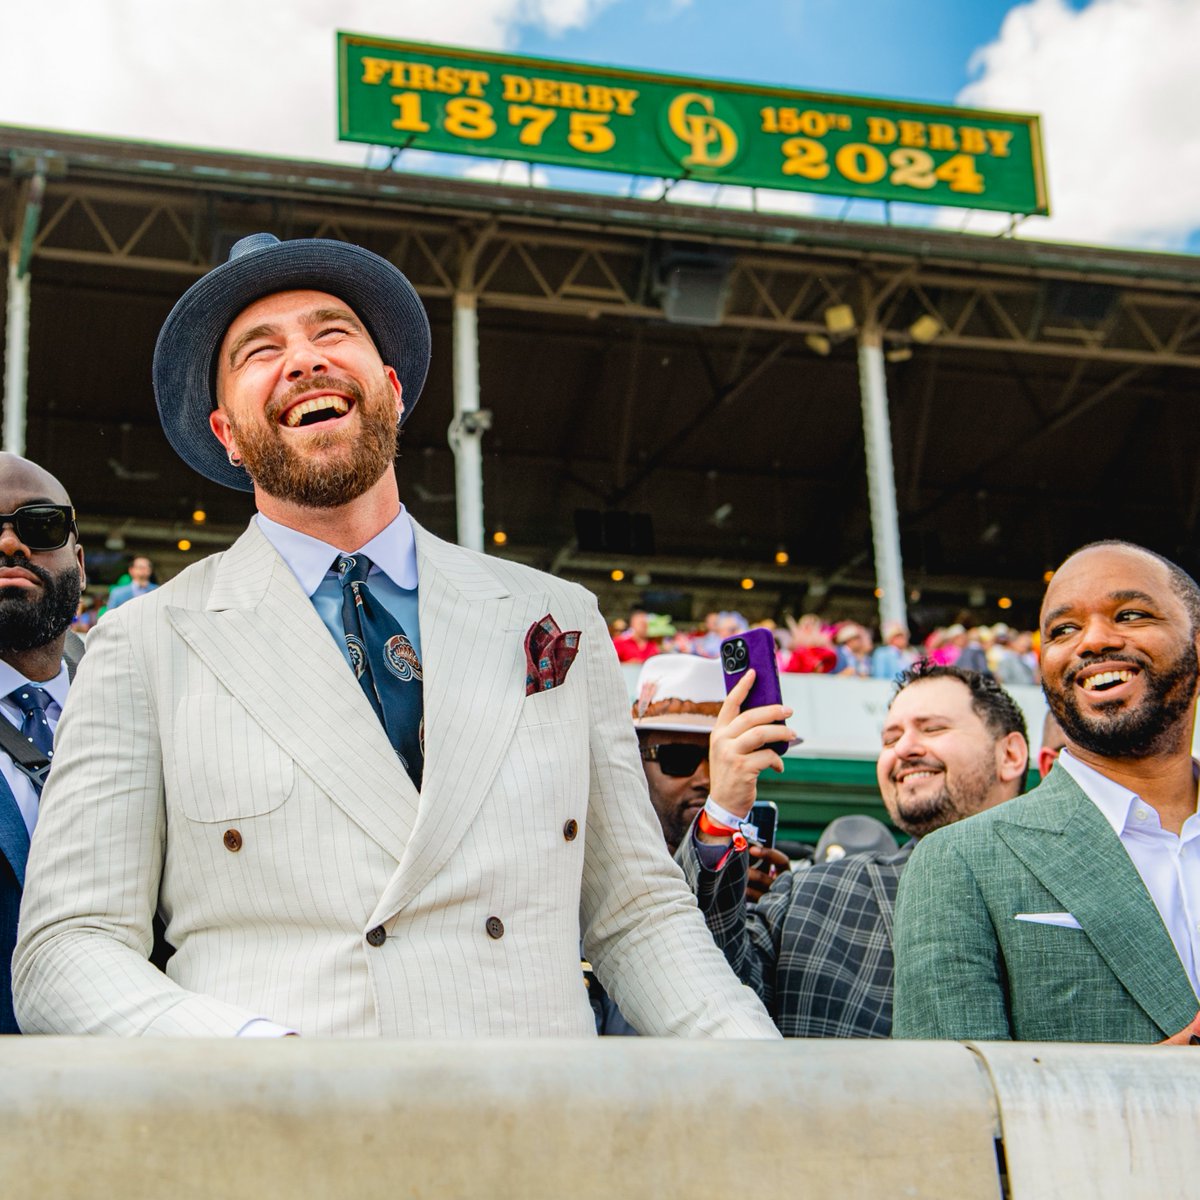 Travis looks to be having a good time! 😁 #KentuckyDerby150